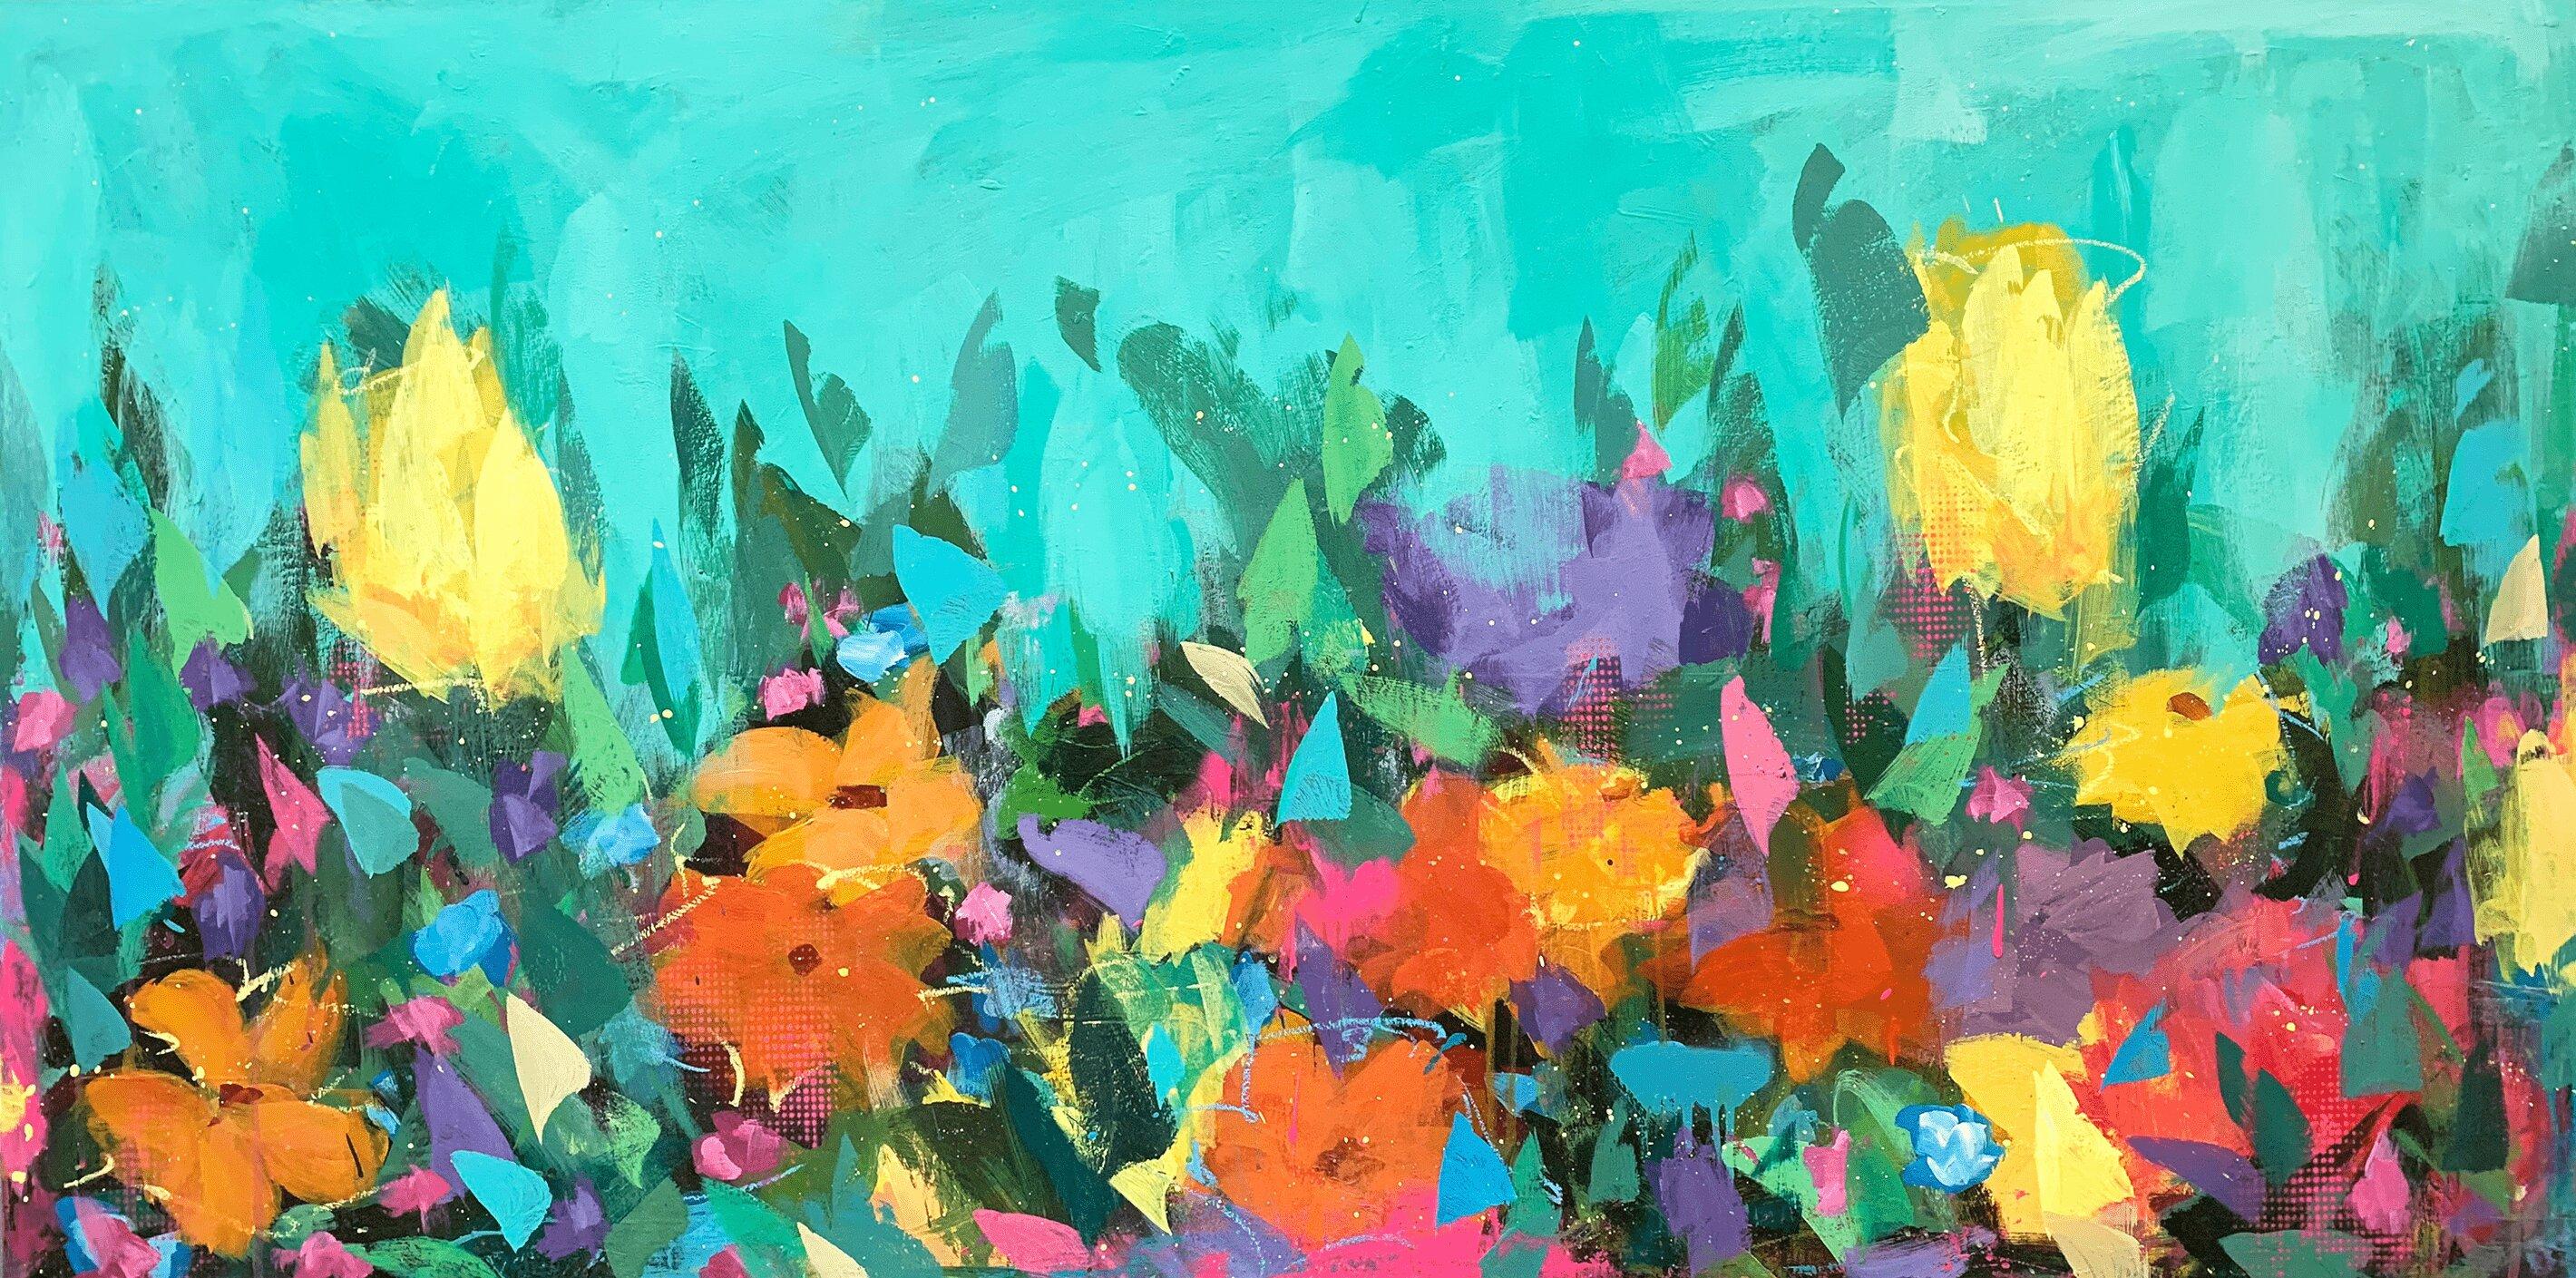 Flow of Energy - Contemporary Floral Landscape Painting